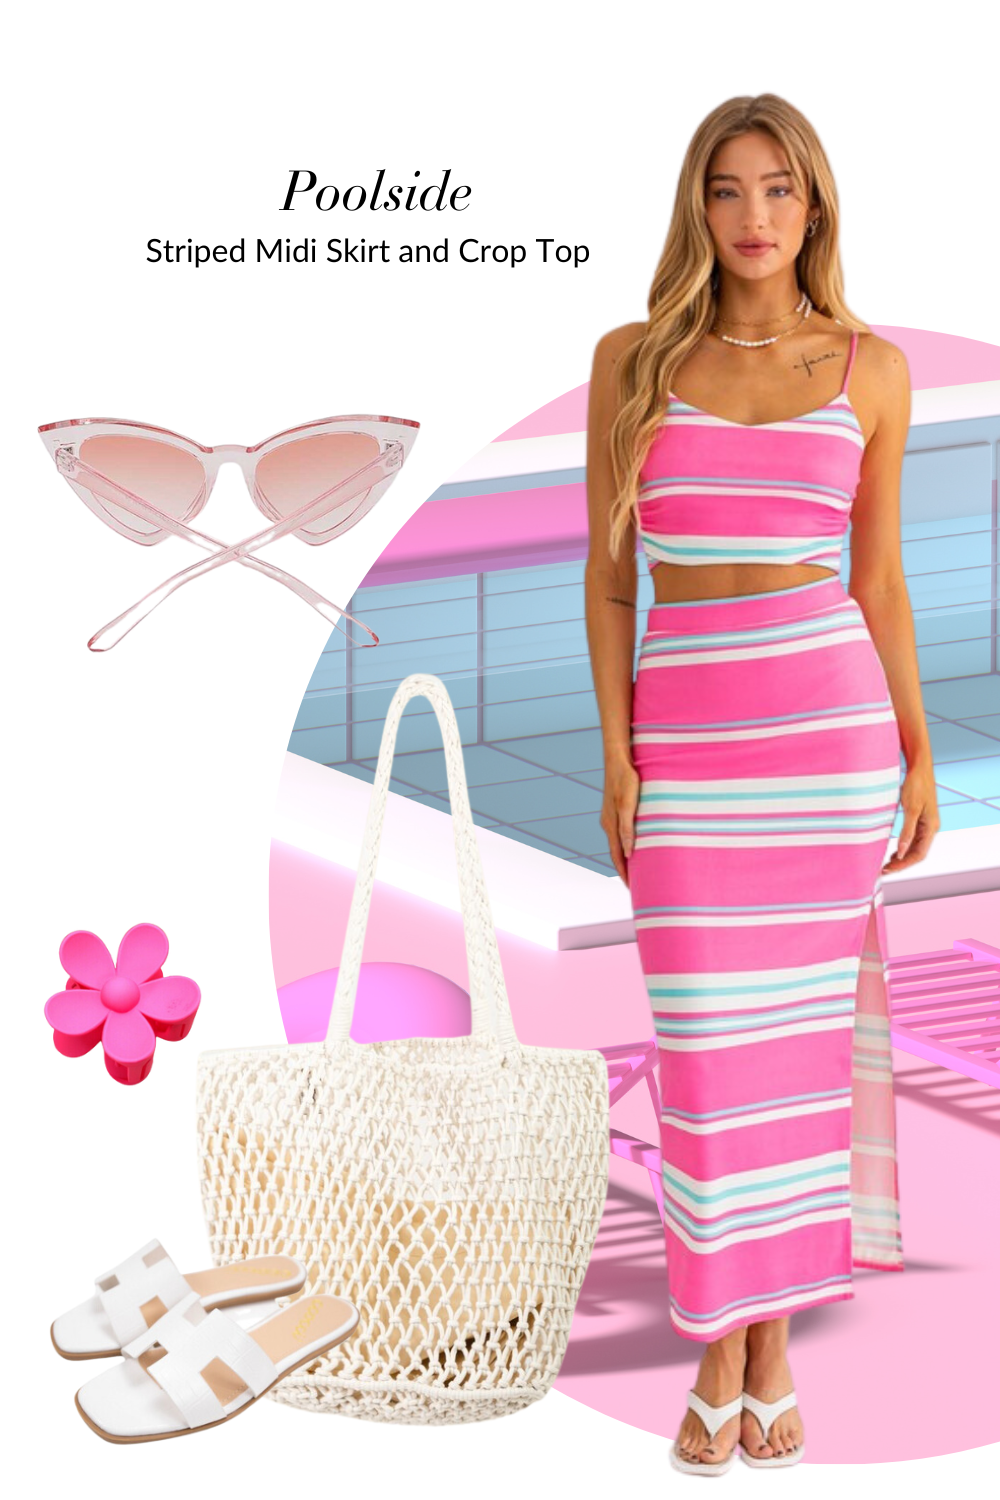 Pink Striped skirt and top white tote bag and sandals, pink flower hairclip, pink cateye sunglasses